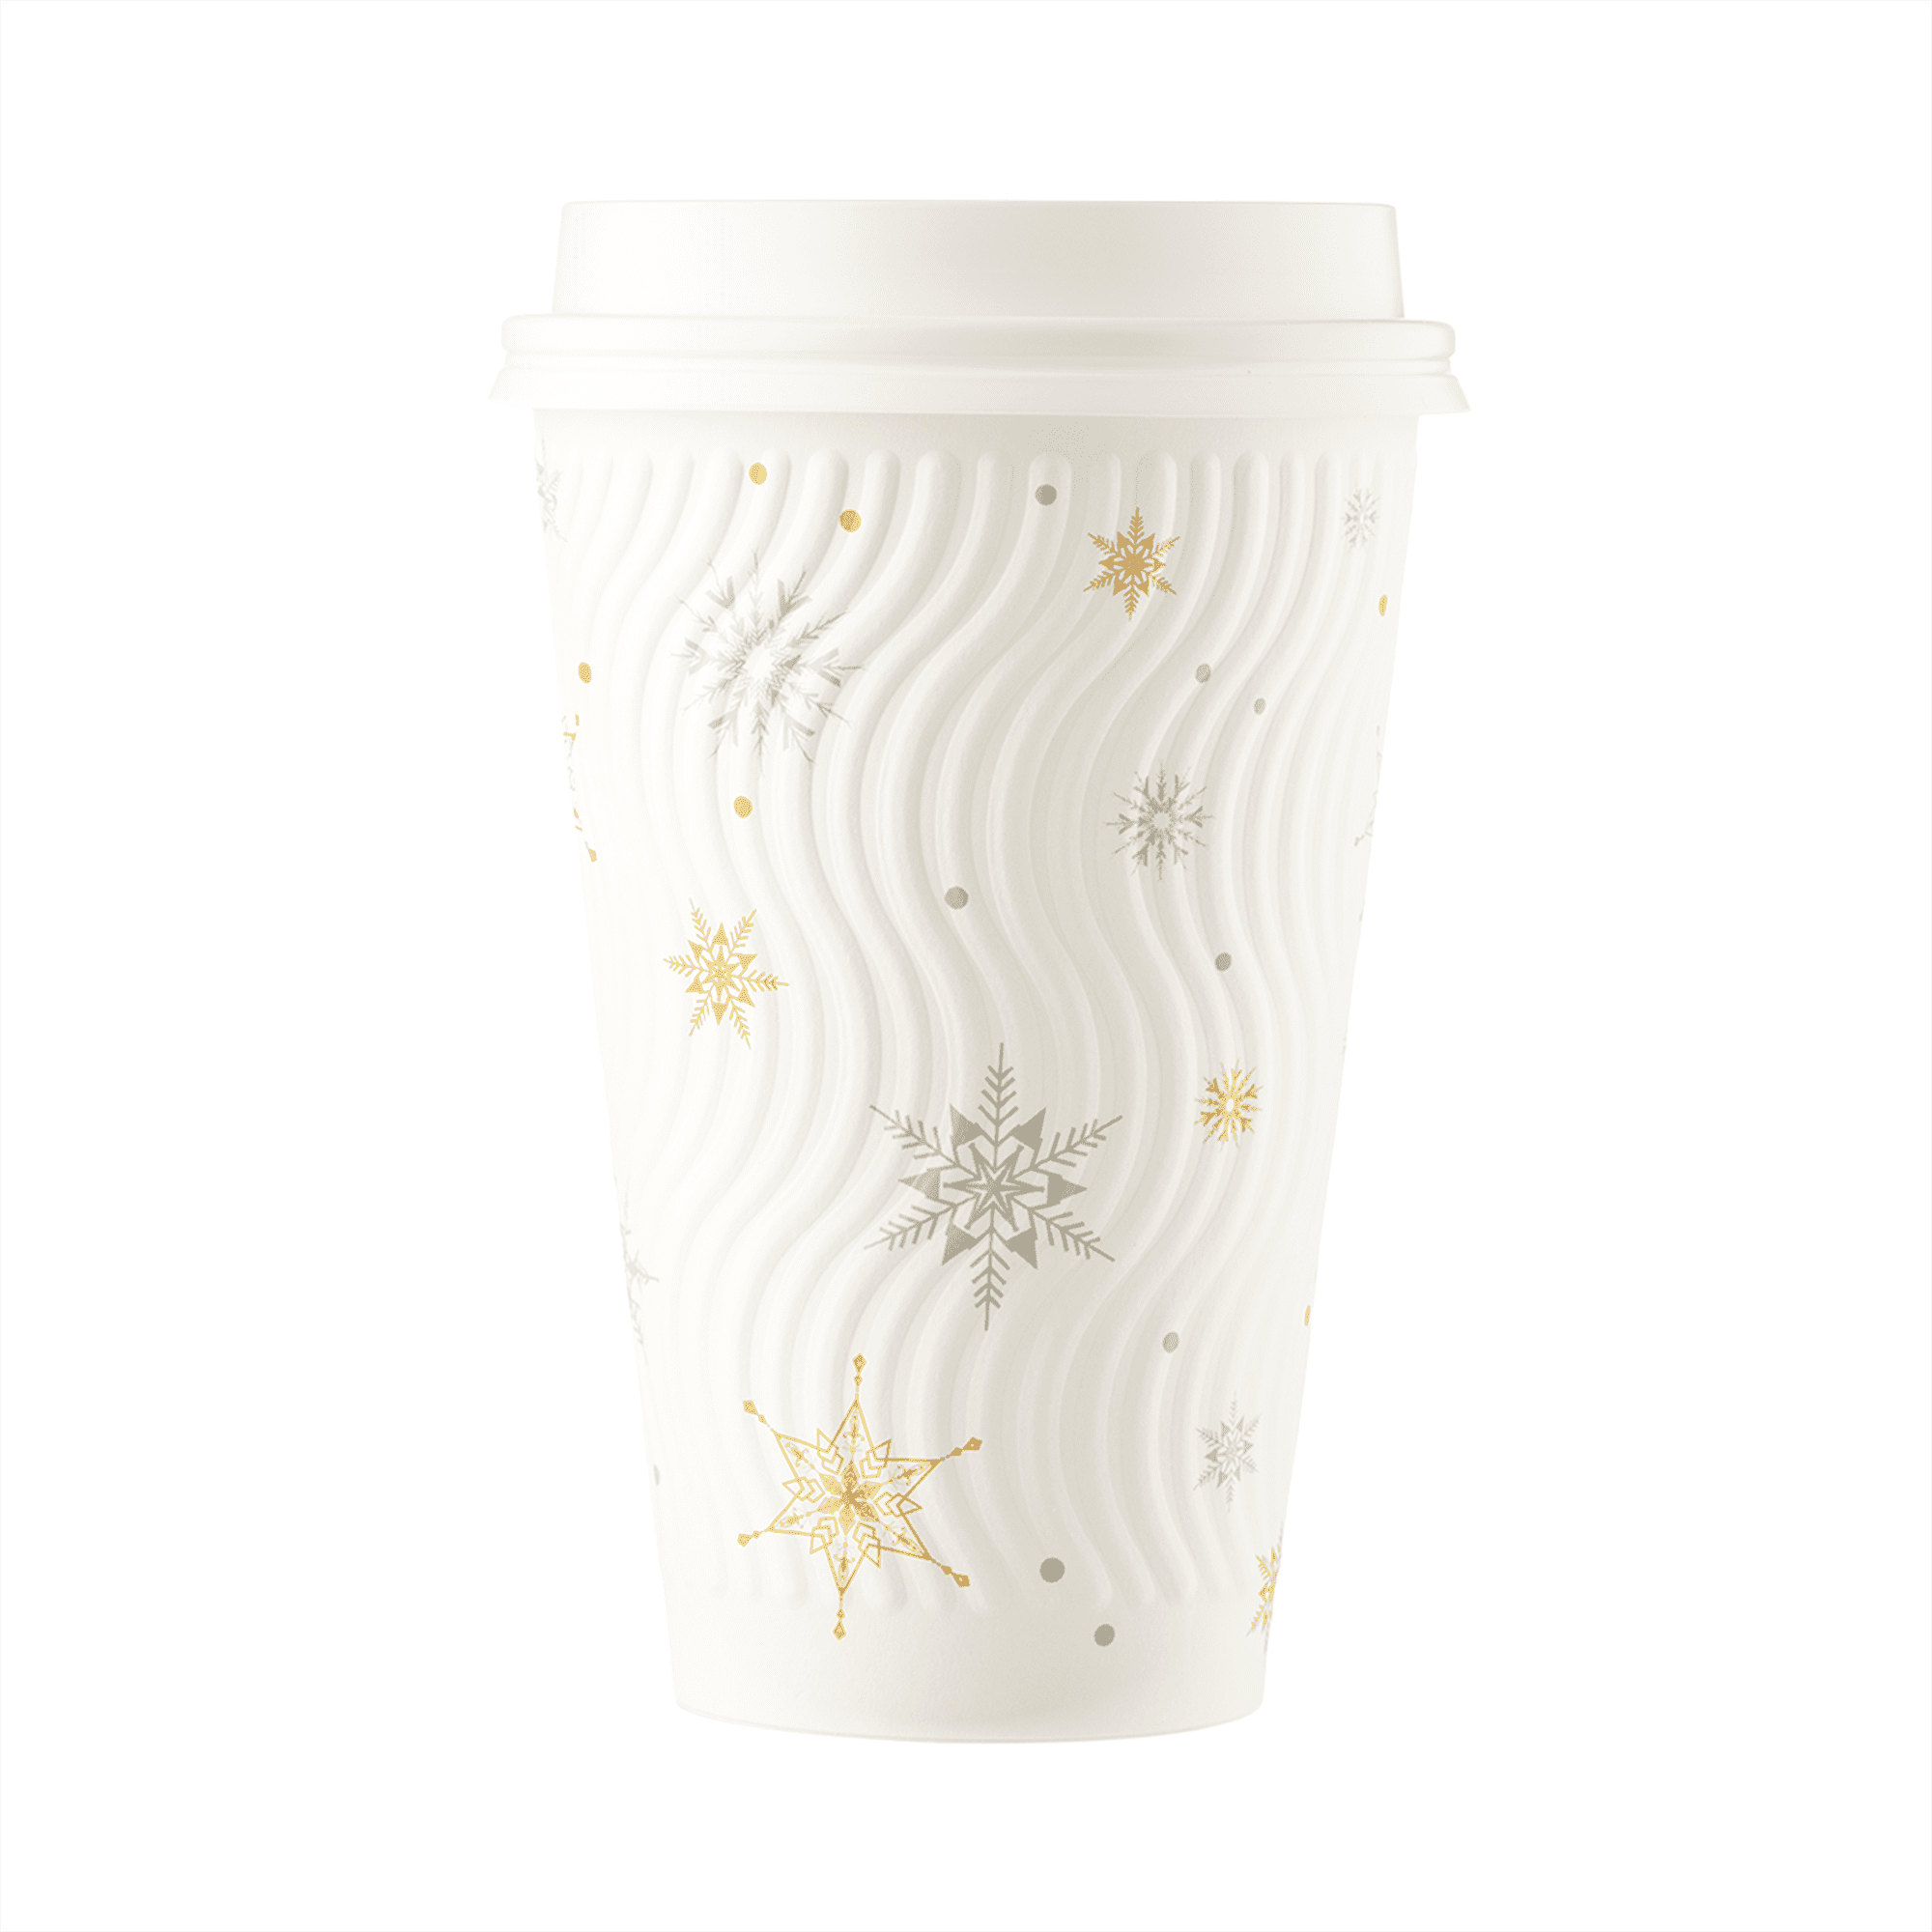 700ml Starbucks Disposable Paper Cup White Coffee Cup 2022 Starbucks  Tumblers For Sale Hot With Lid Drink Cups From Cynthia_e, $1.69